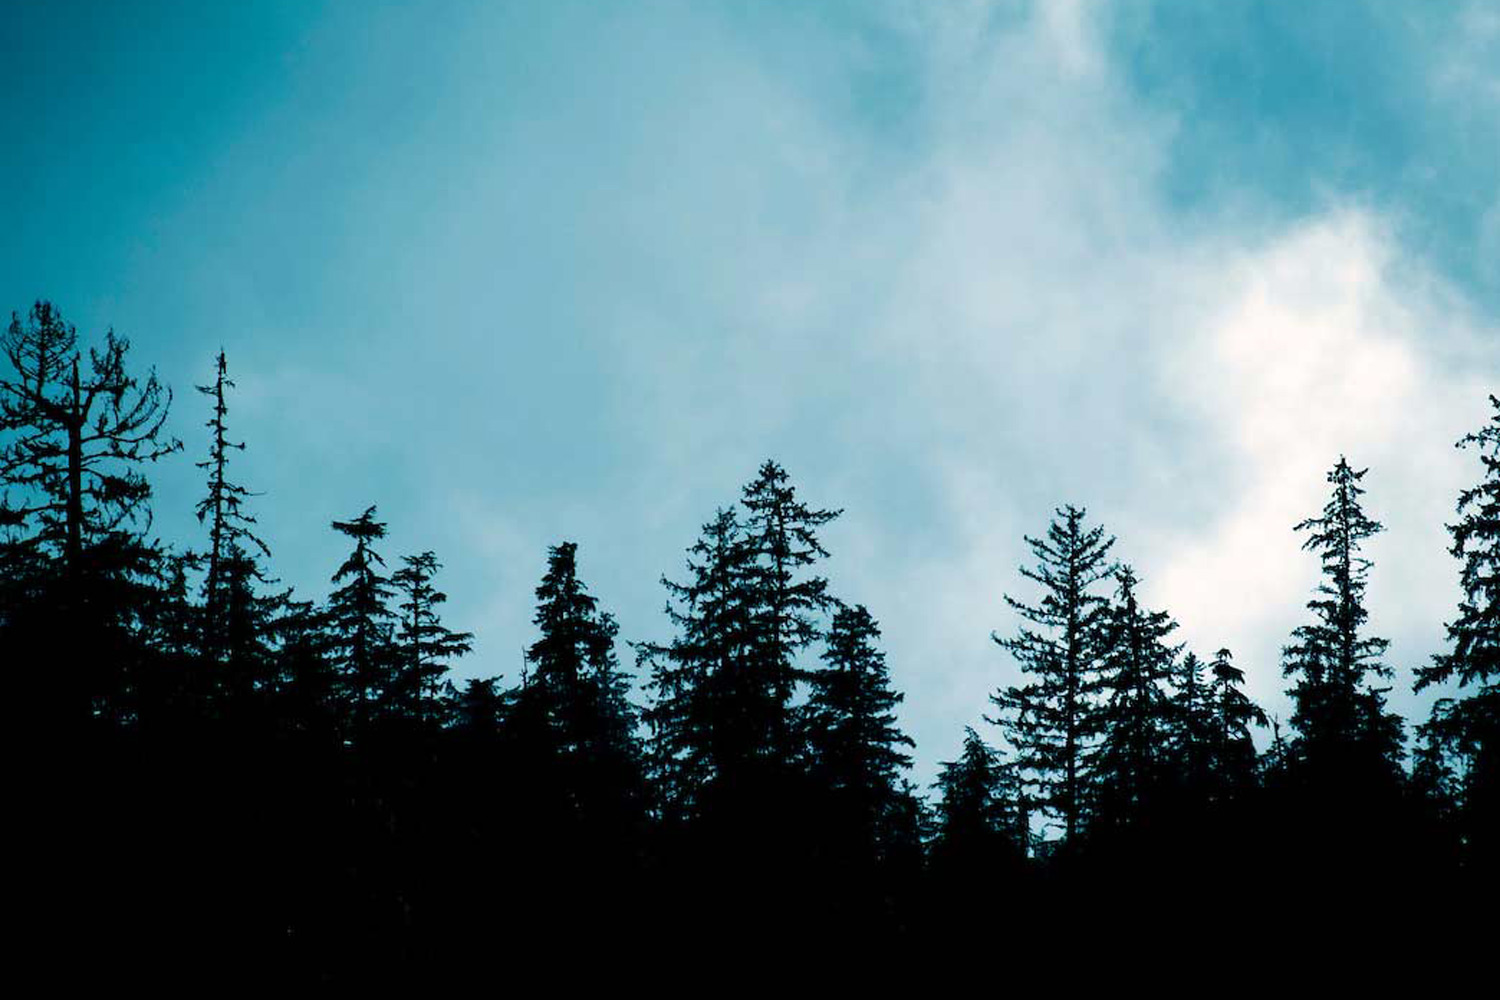 A silhouette of evergreen trees against a blue sky